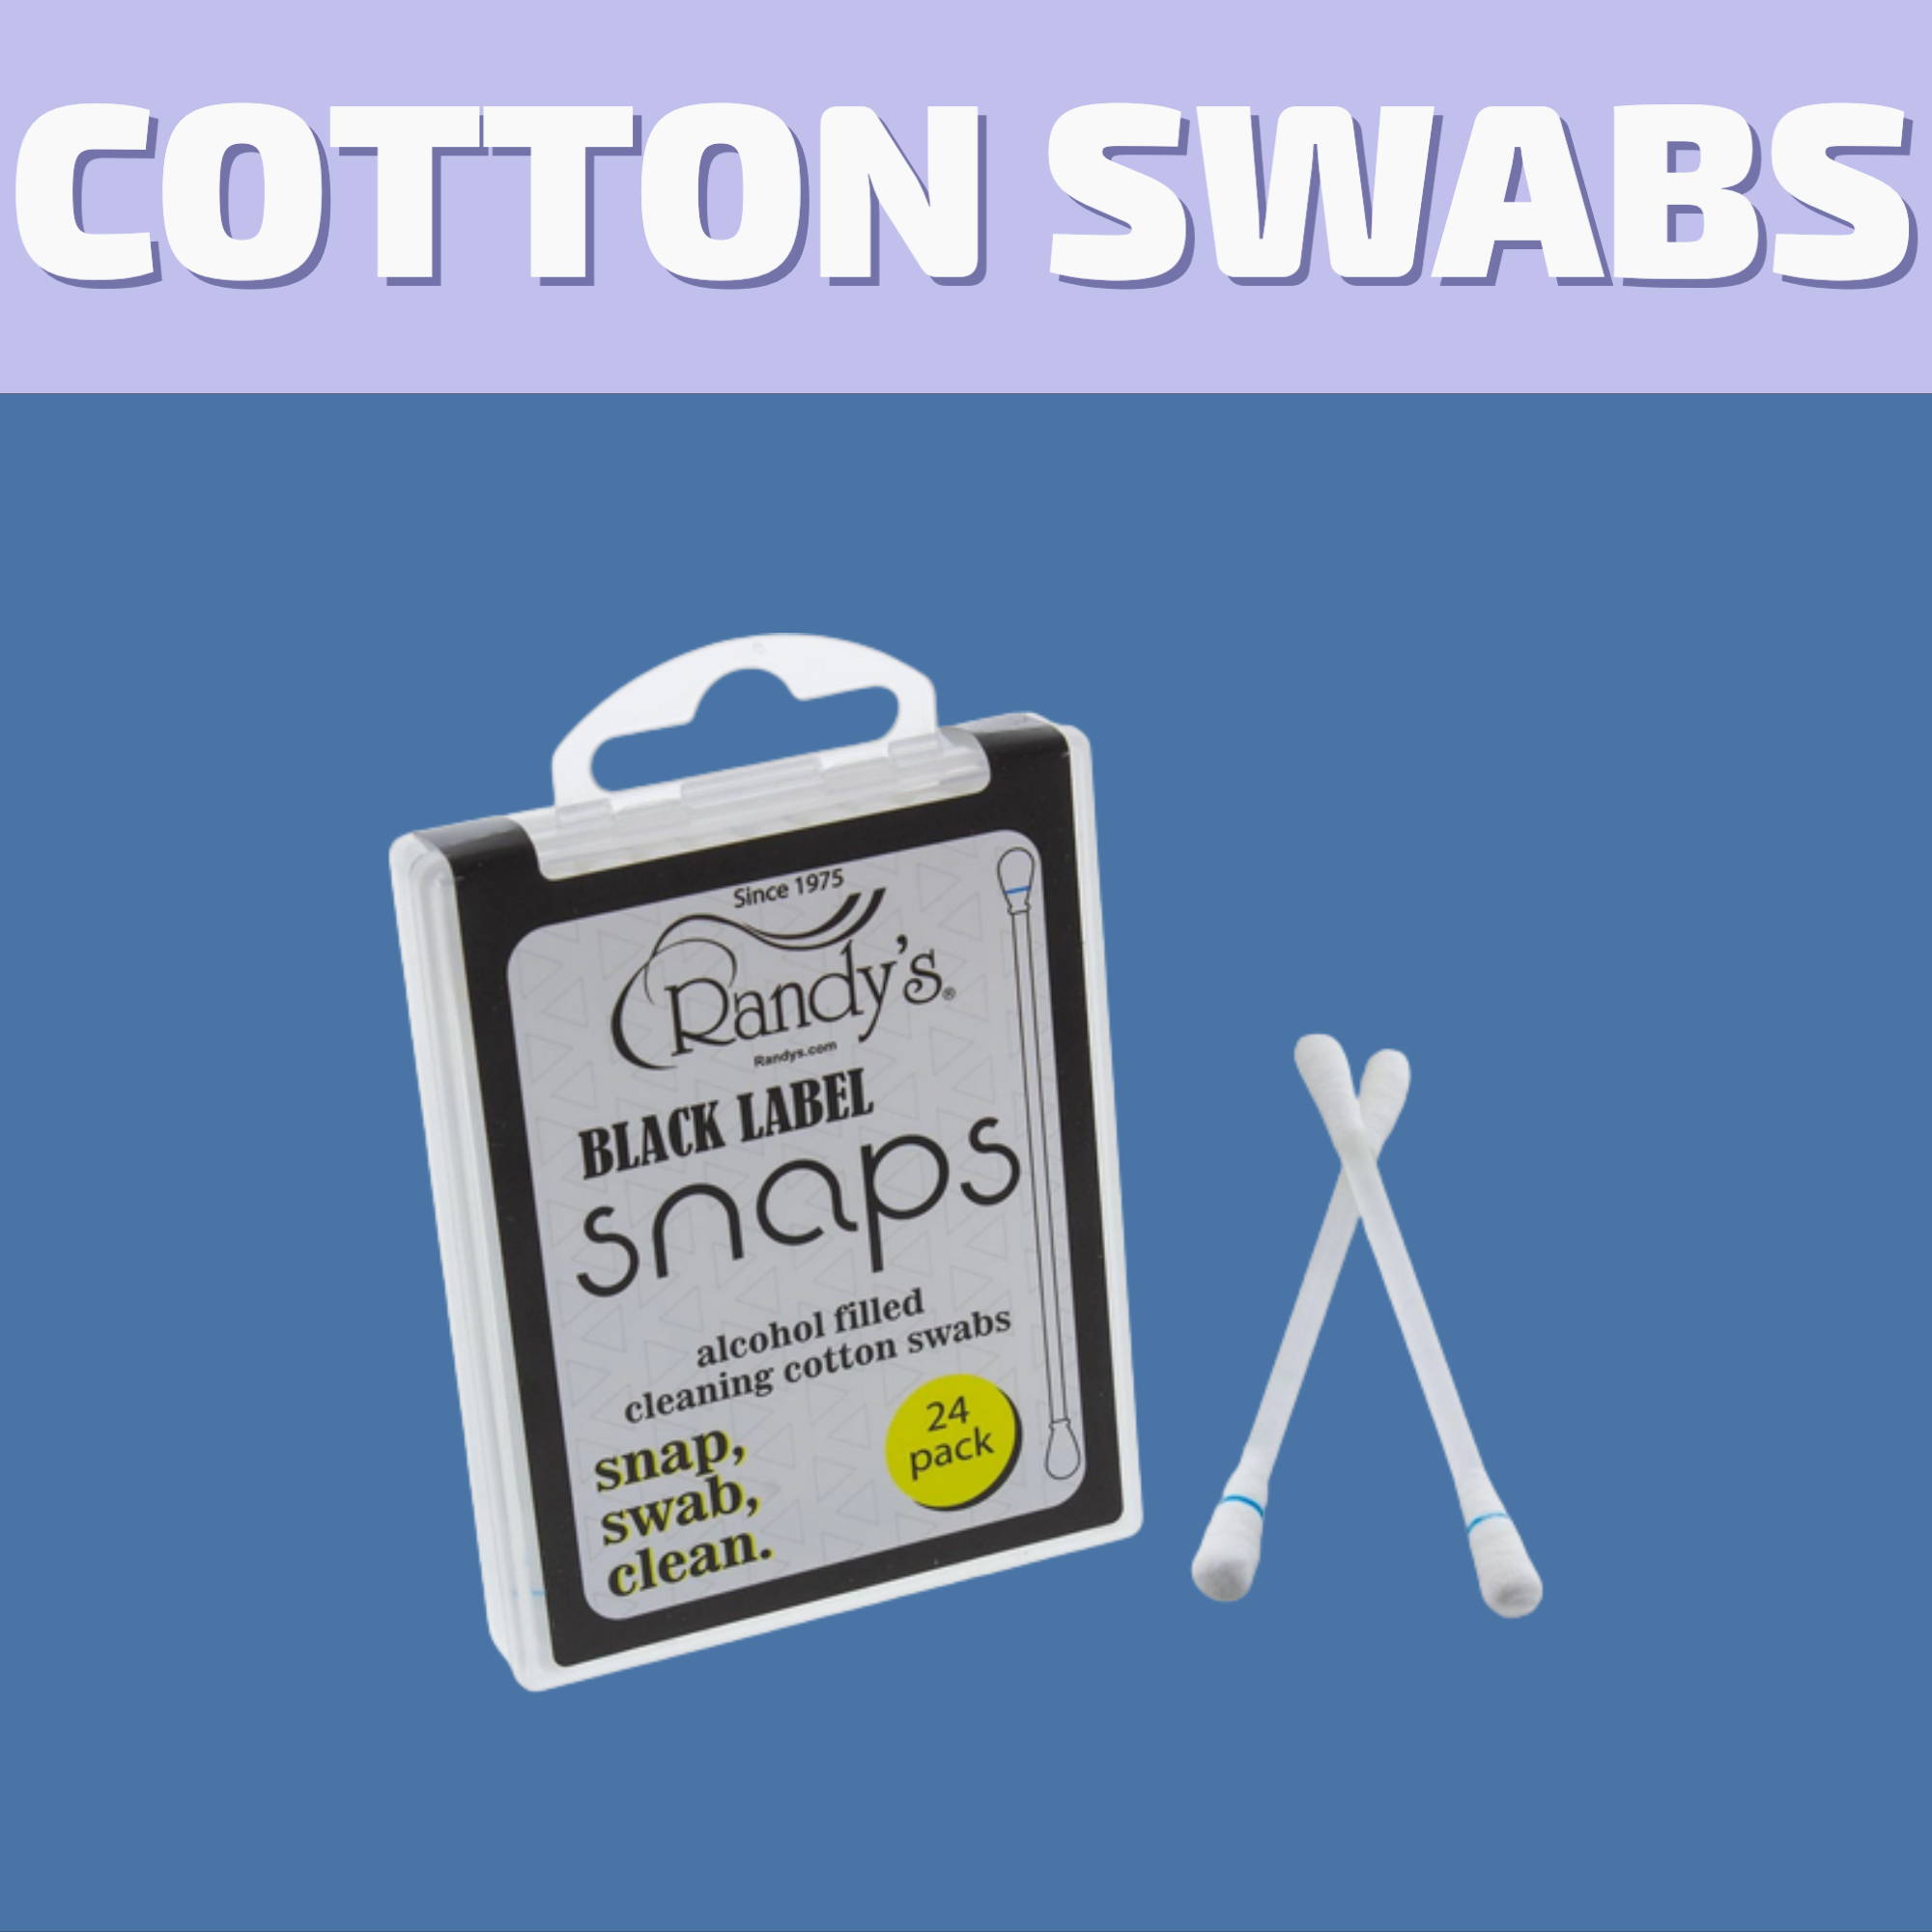 Buy Cotton Swabs and bong cleaners for same day delivery or visit the best cannabis store on 580 Academy Road.   